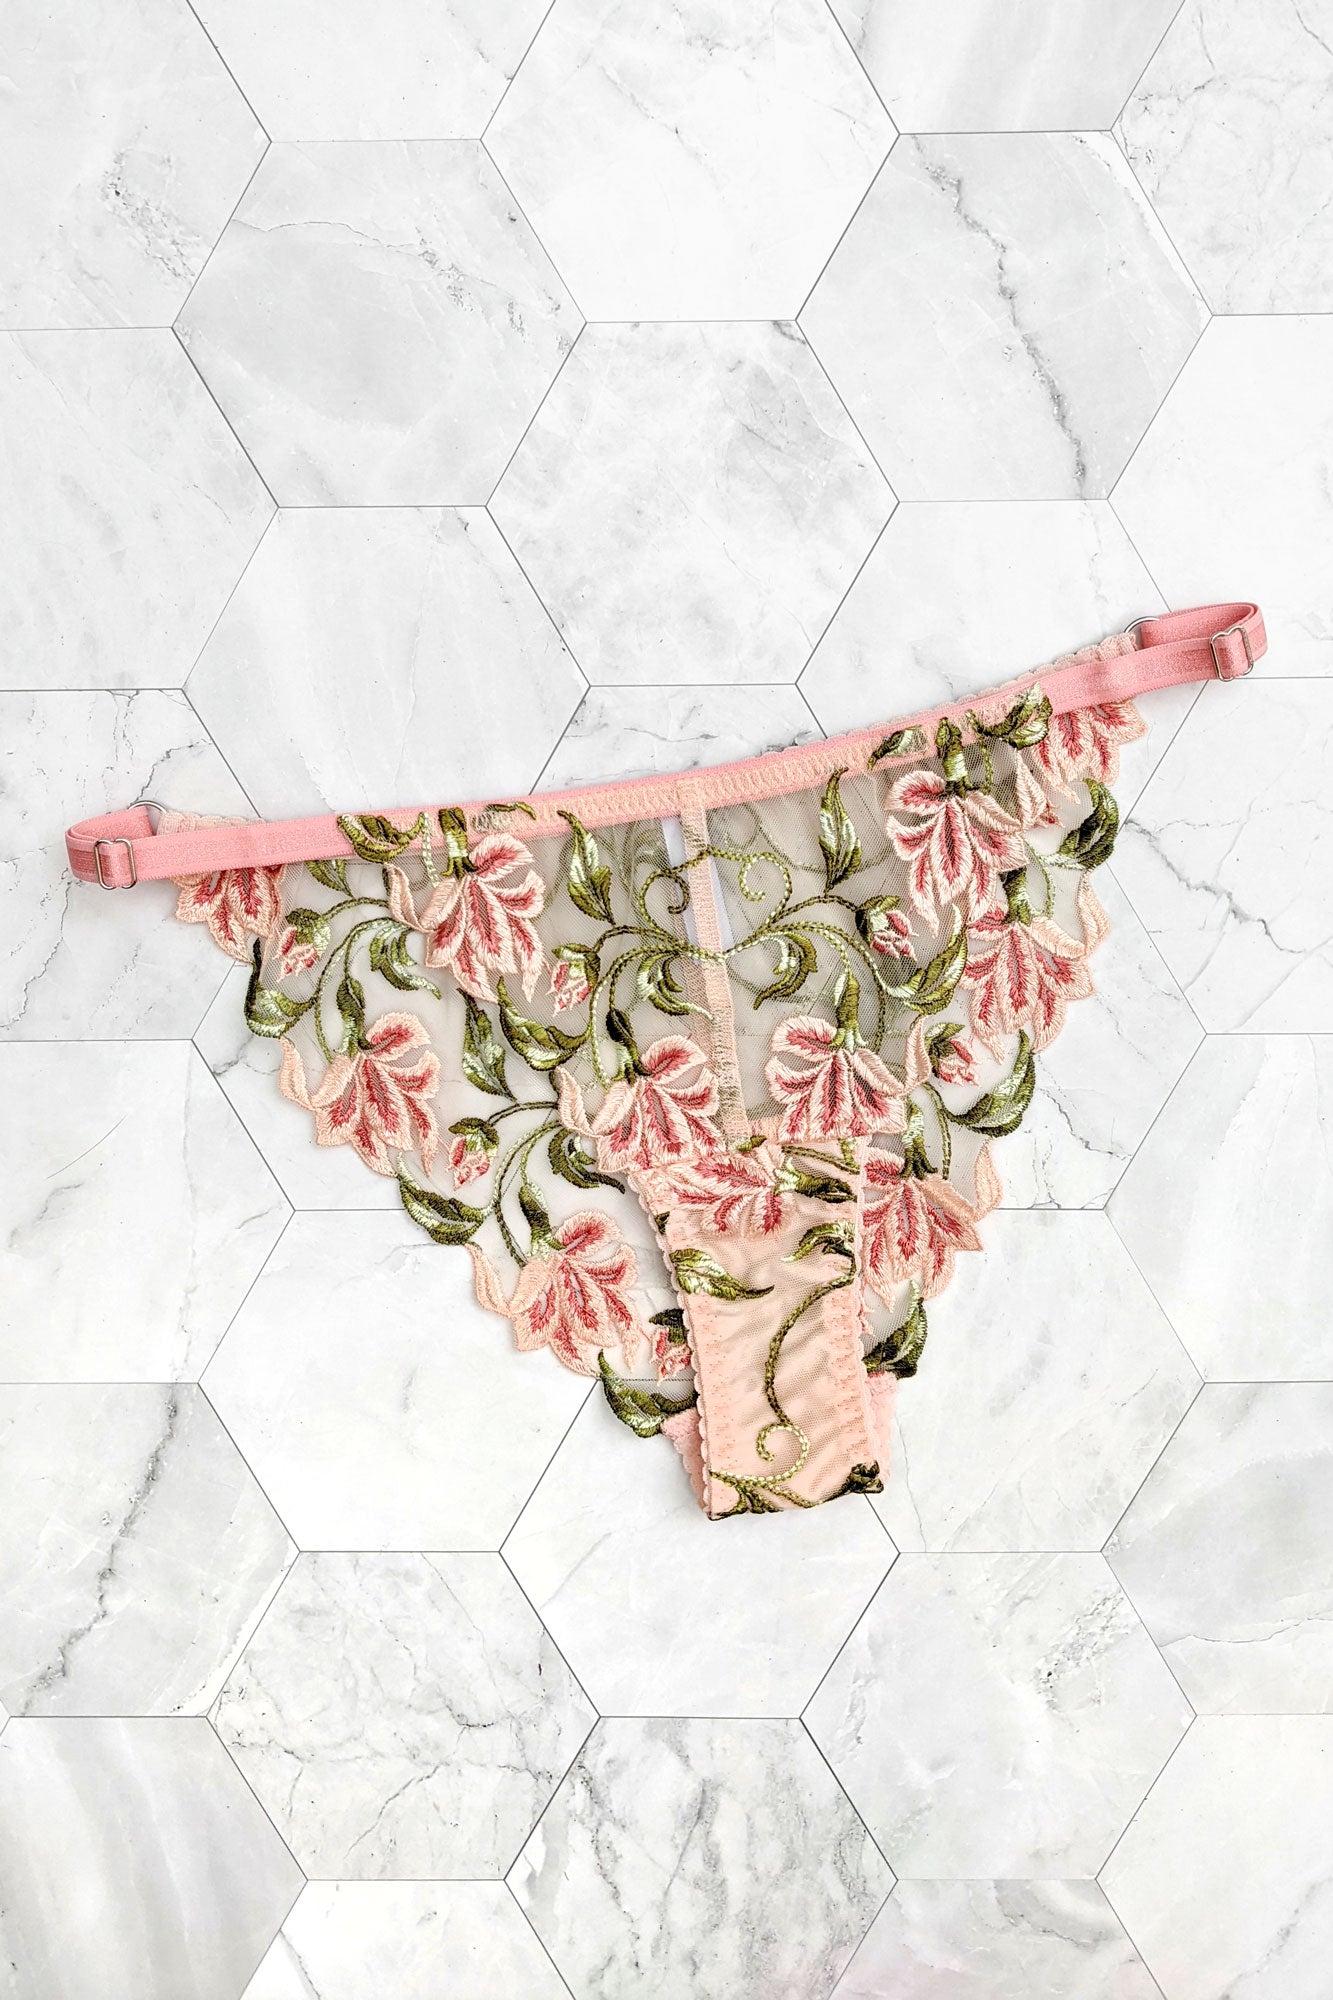 Japanese lingerie brand now selling underwear embroidered with a